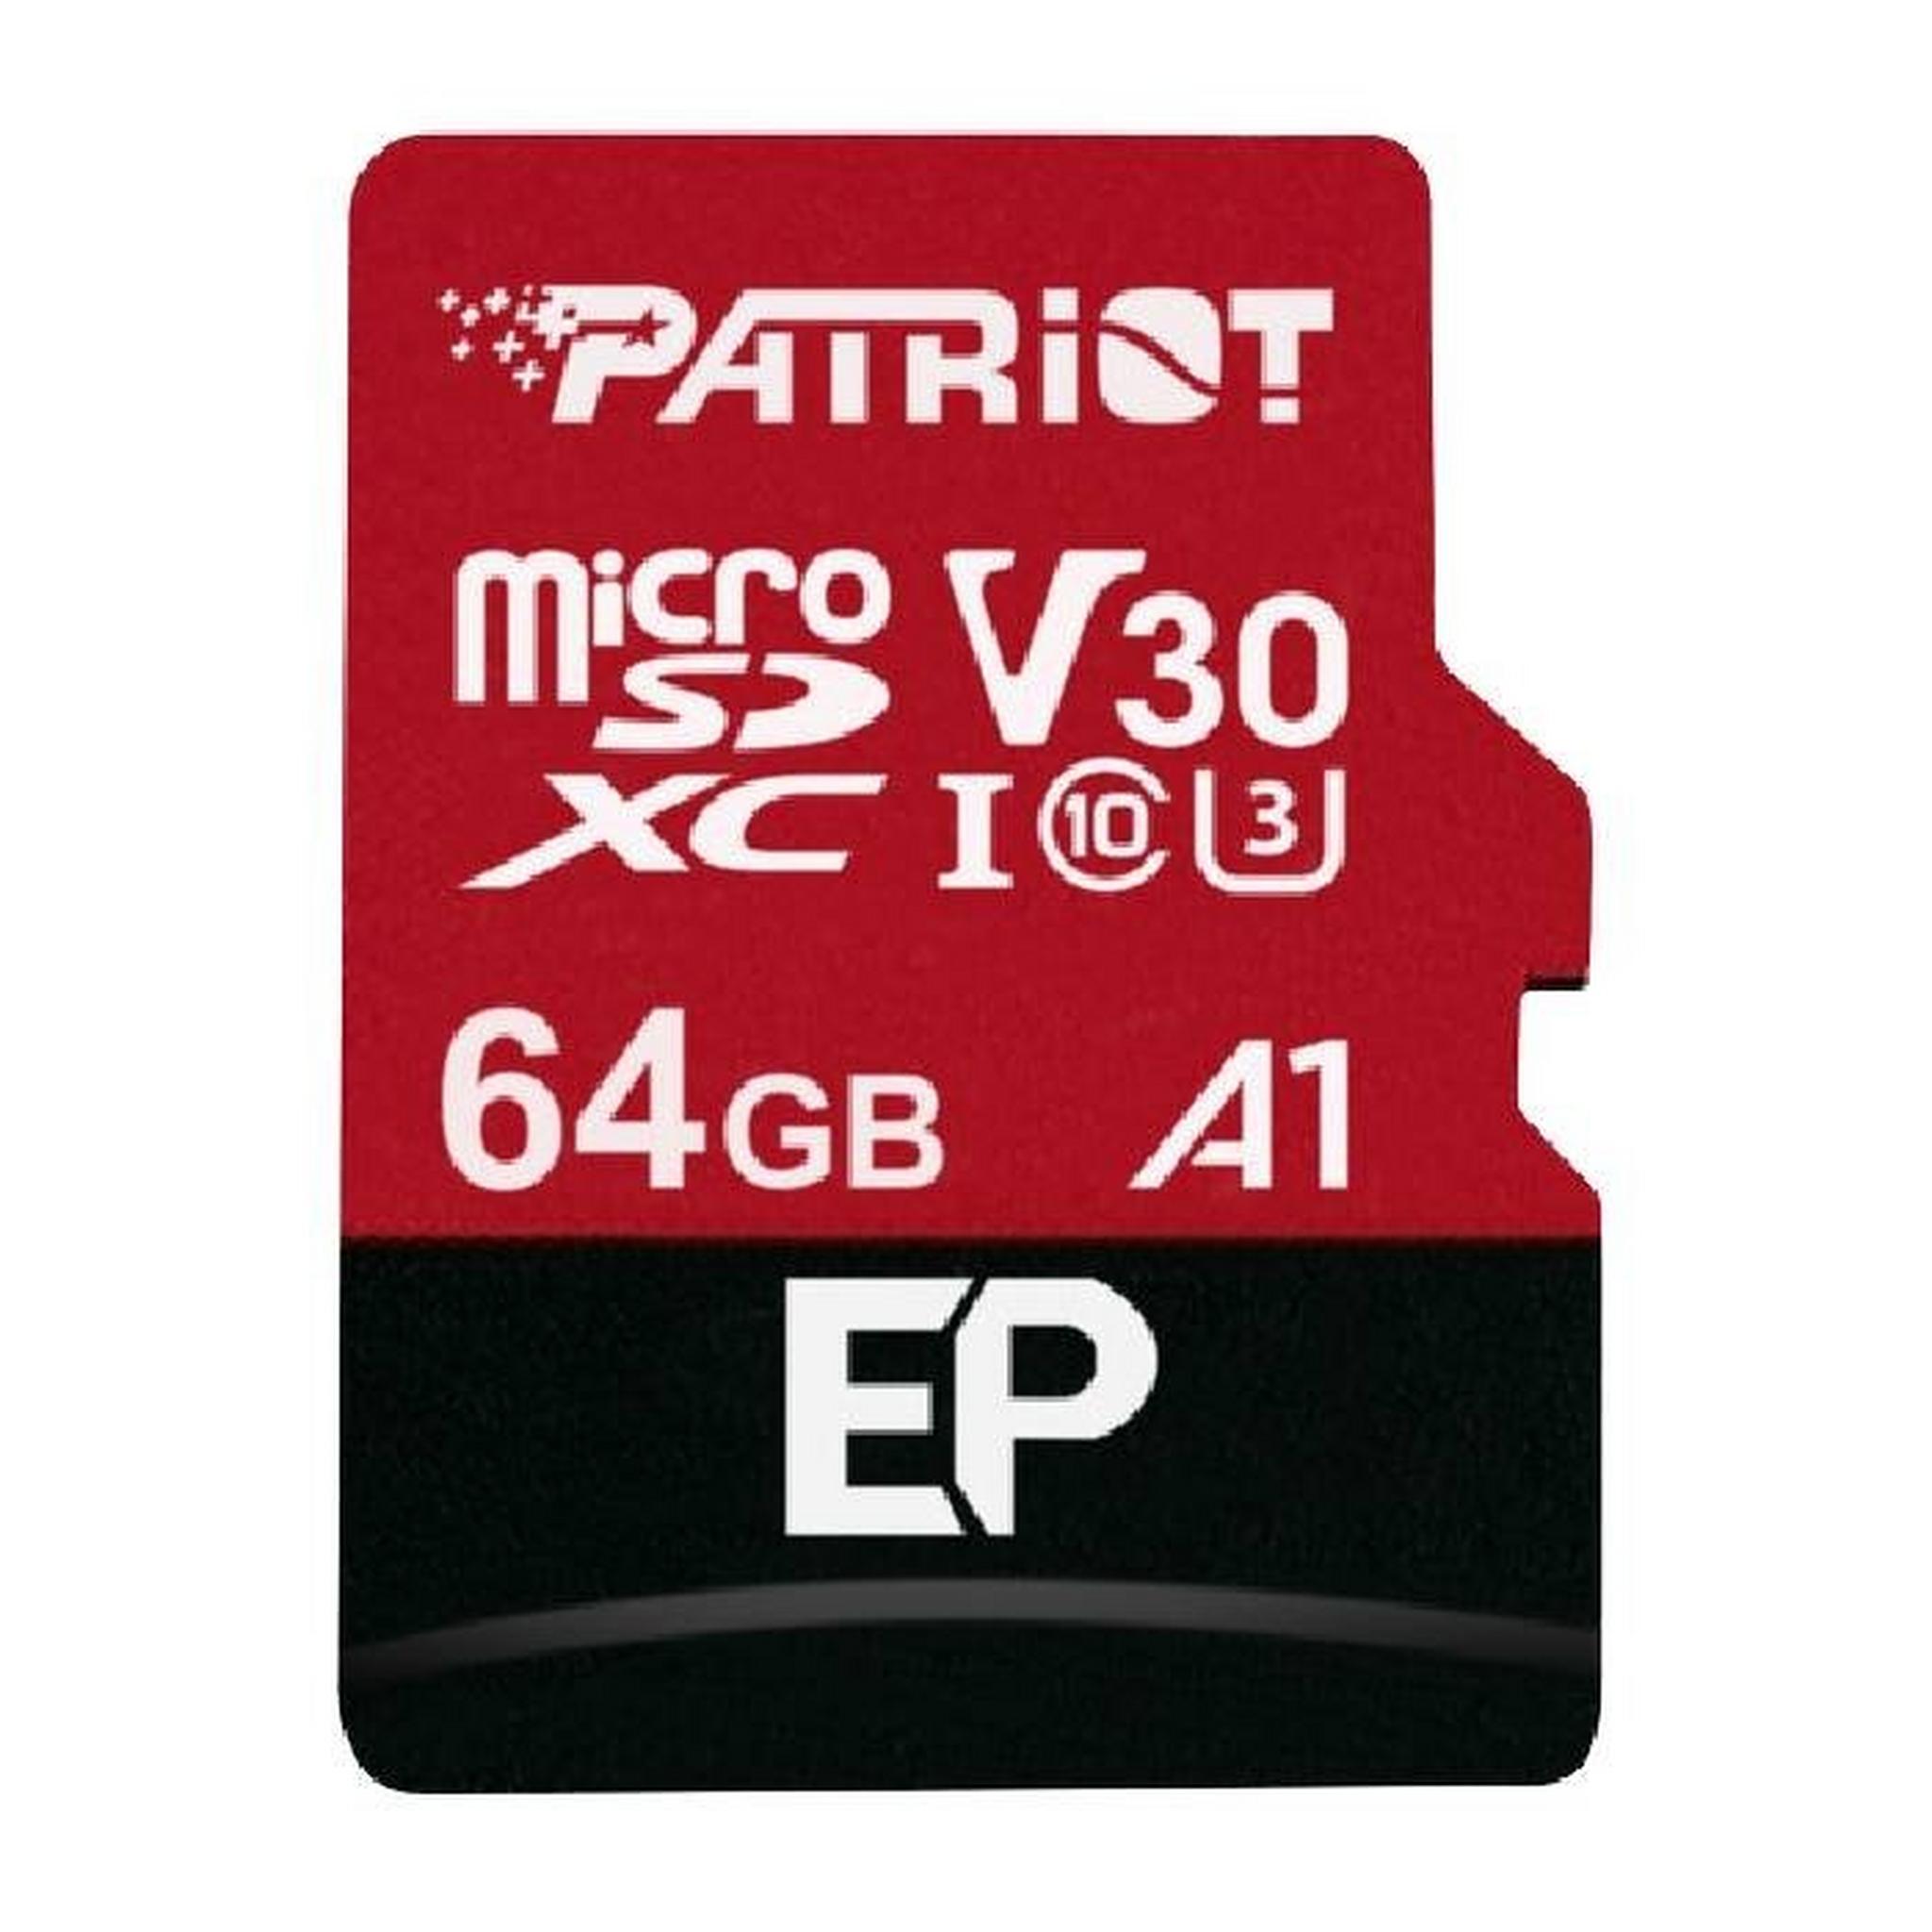 Patriot 64GB EP Series UHS-I microSDXC Memory Card with SD Adapter